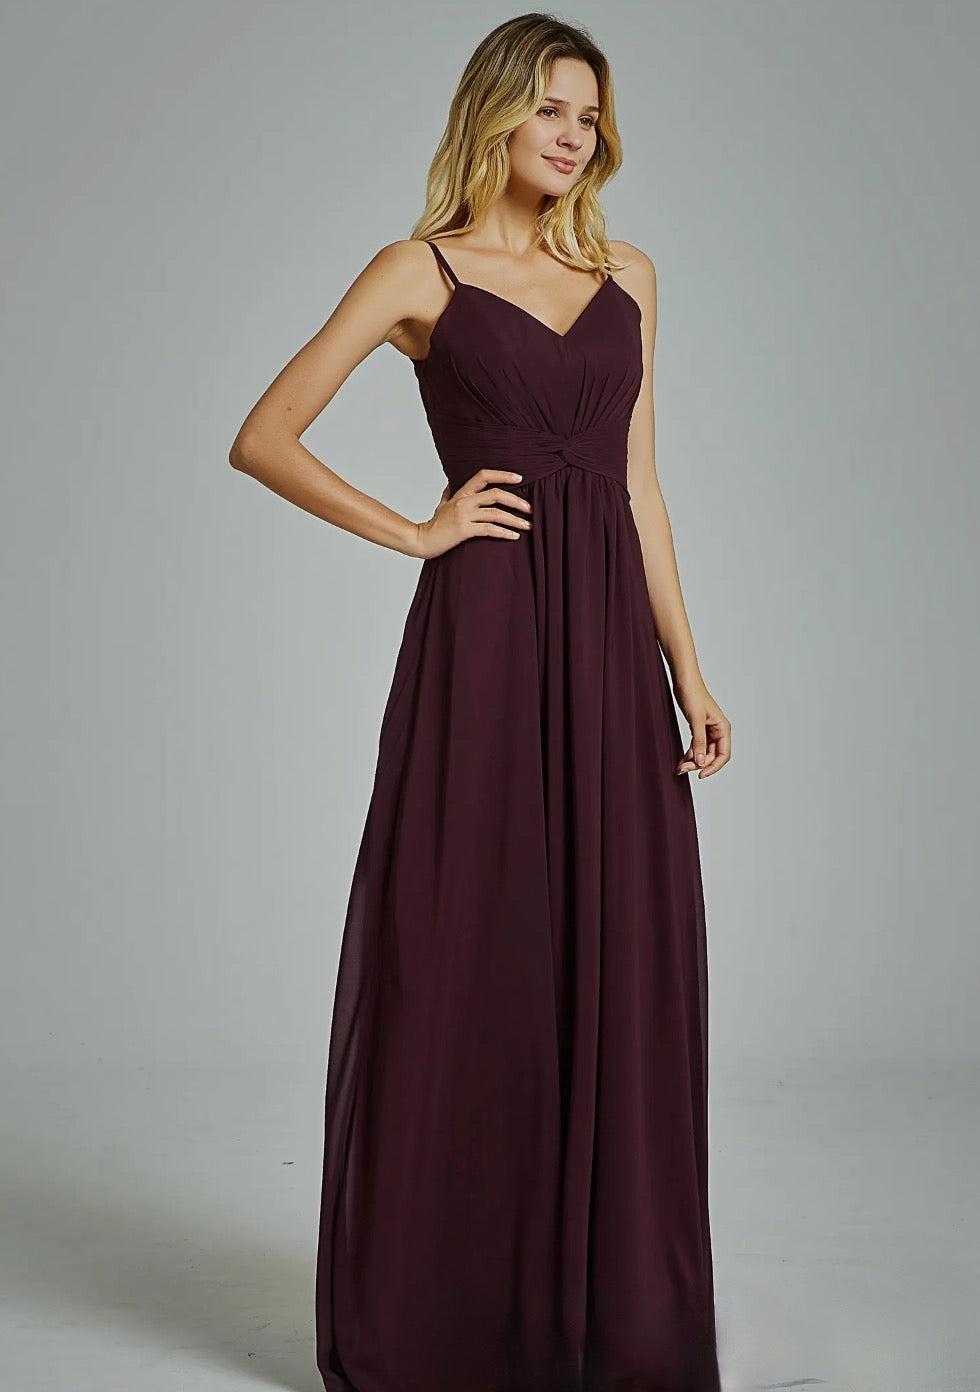 Load image into Gallery viewer, Spaghetti Straps Chiffon Bridesmaid Dress with Twist Front Bodice
